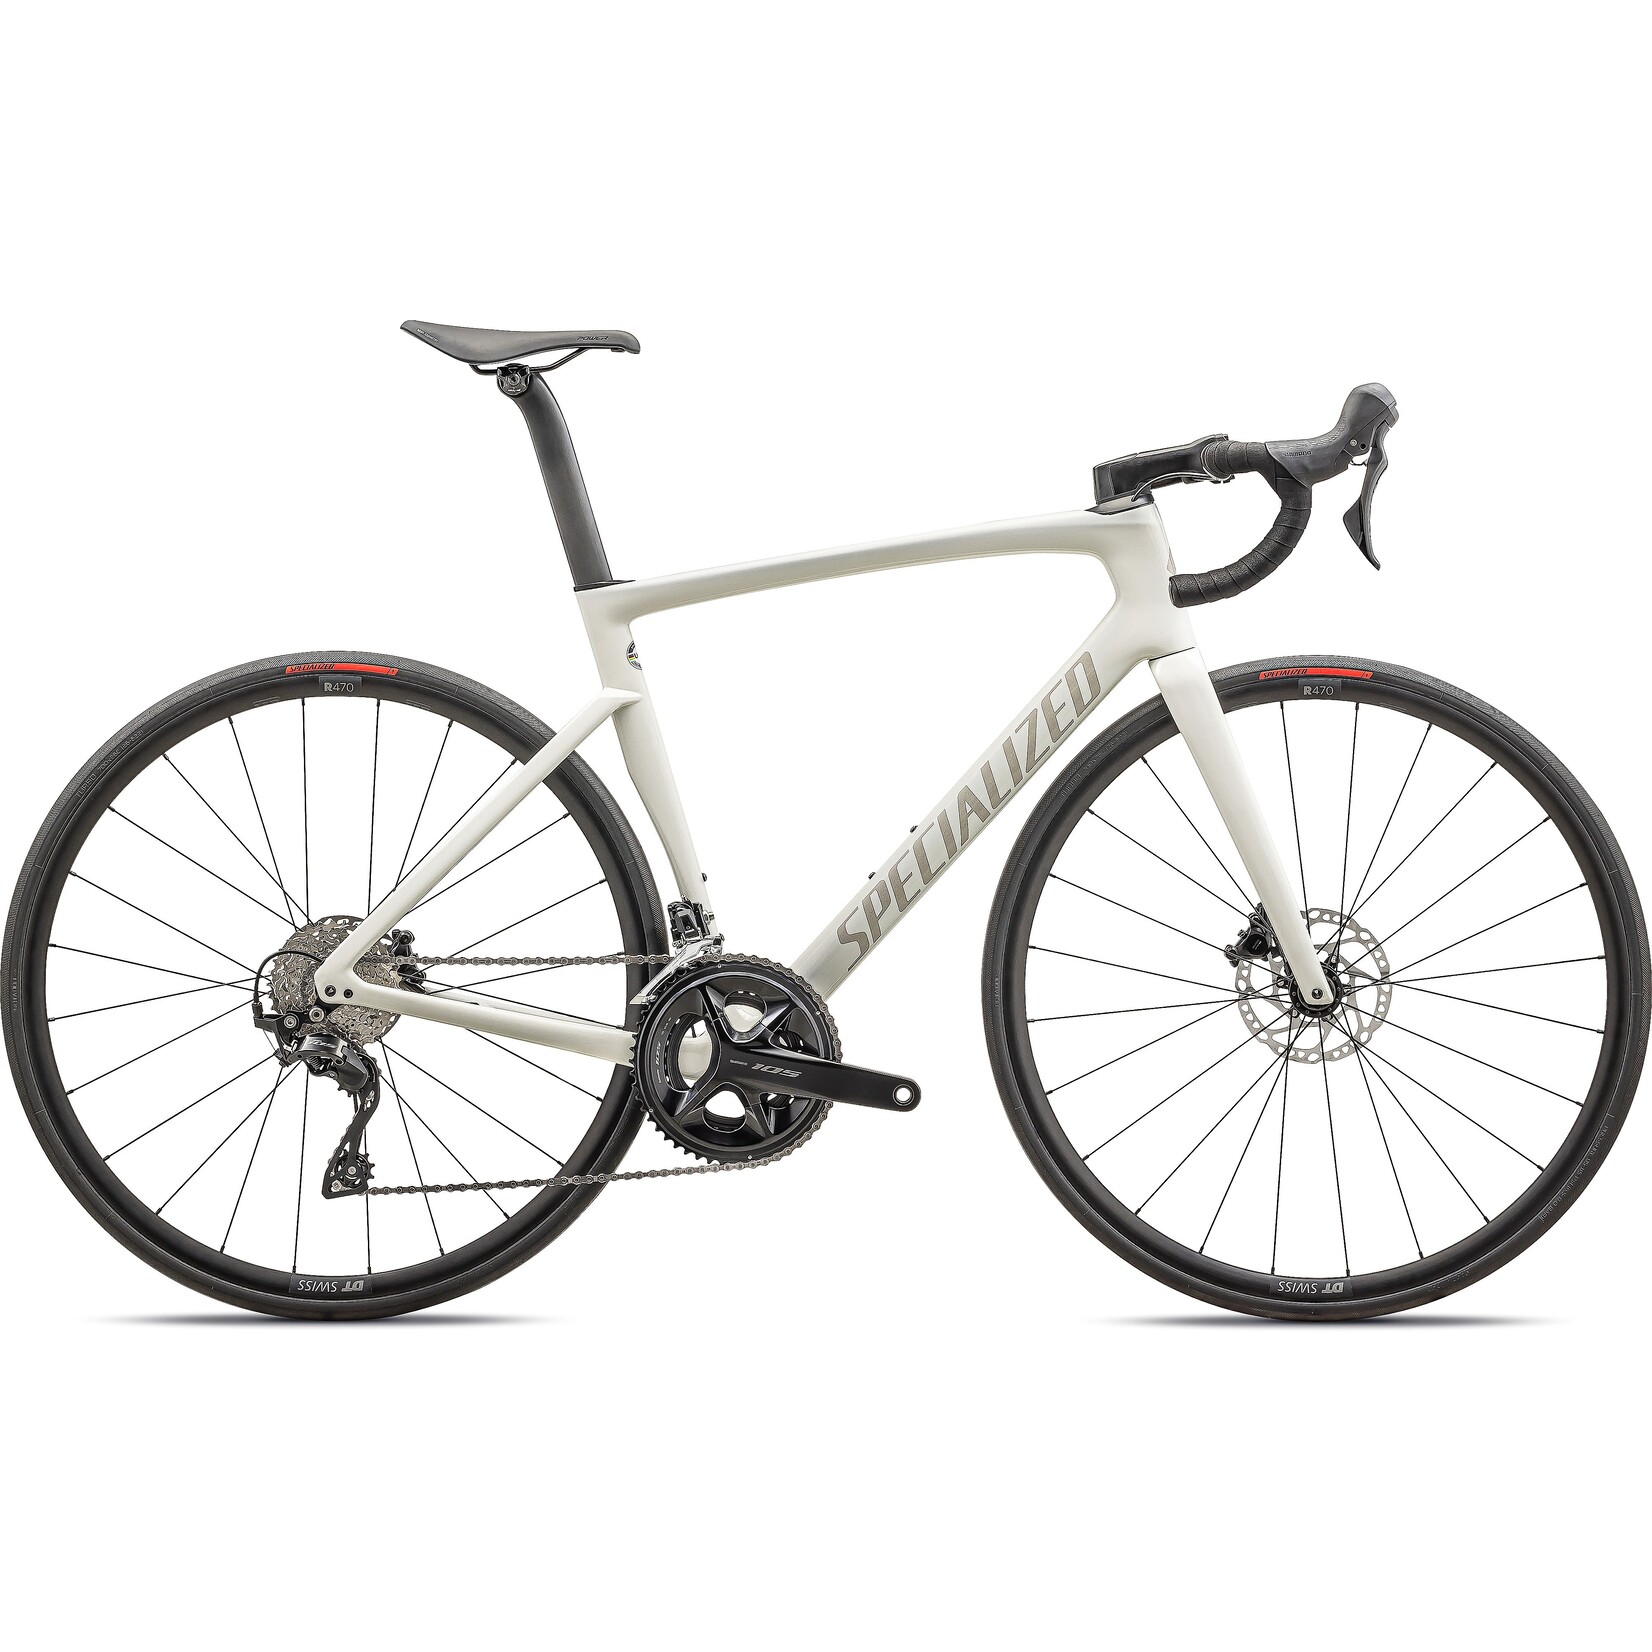 Specialized Tarmac SL7 Sport - Shimano 105 in GLOSS DUNE WHITE / 10% CHAOS PEARL